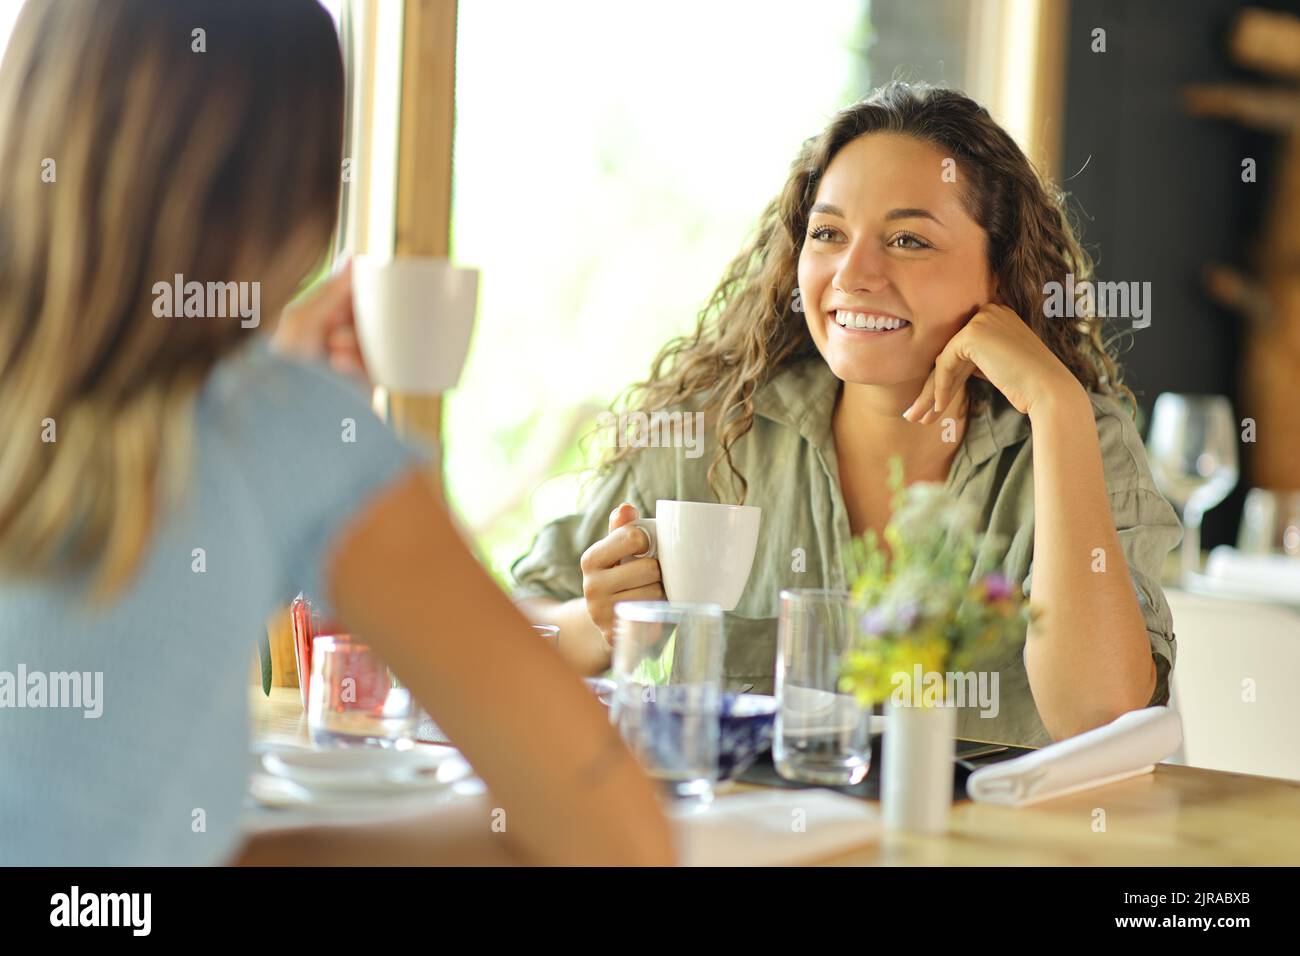 Two women talking and drinking coffee sitting in a restaurant Stock Photo